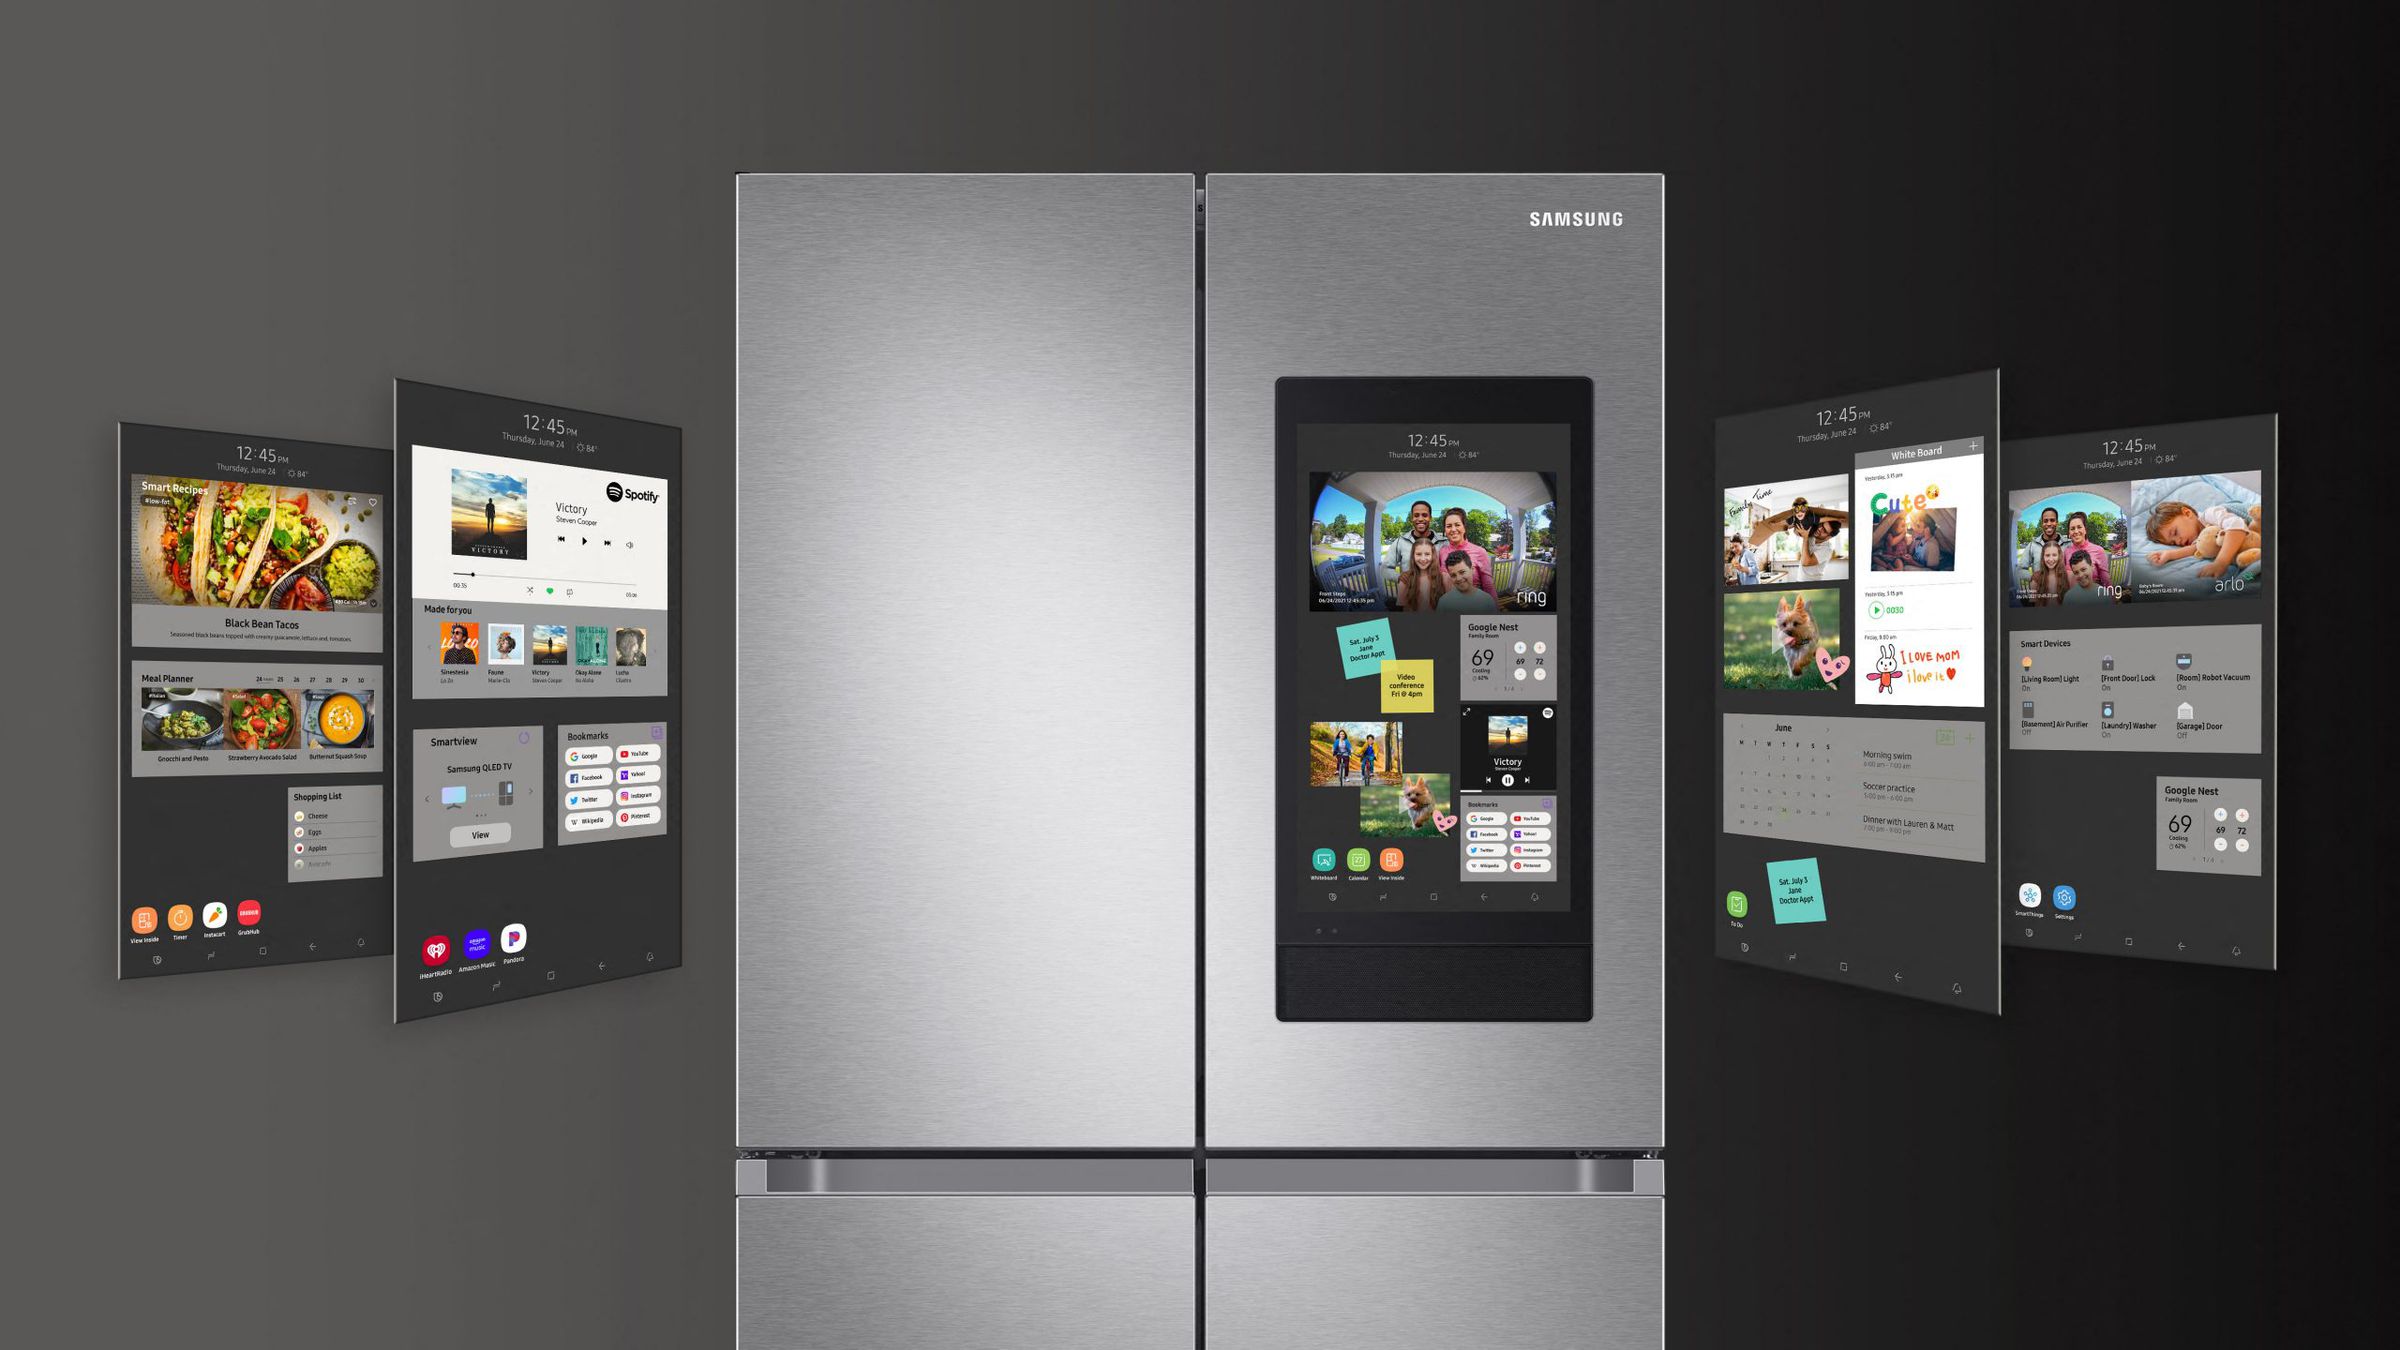 The Samsung Family Hub refrigerator features a built-in tablet that acts as a smart home controller.